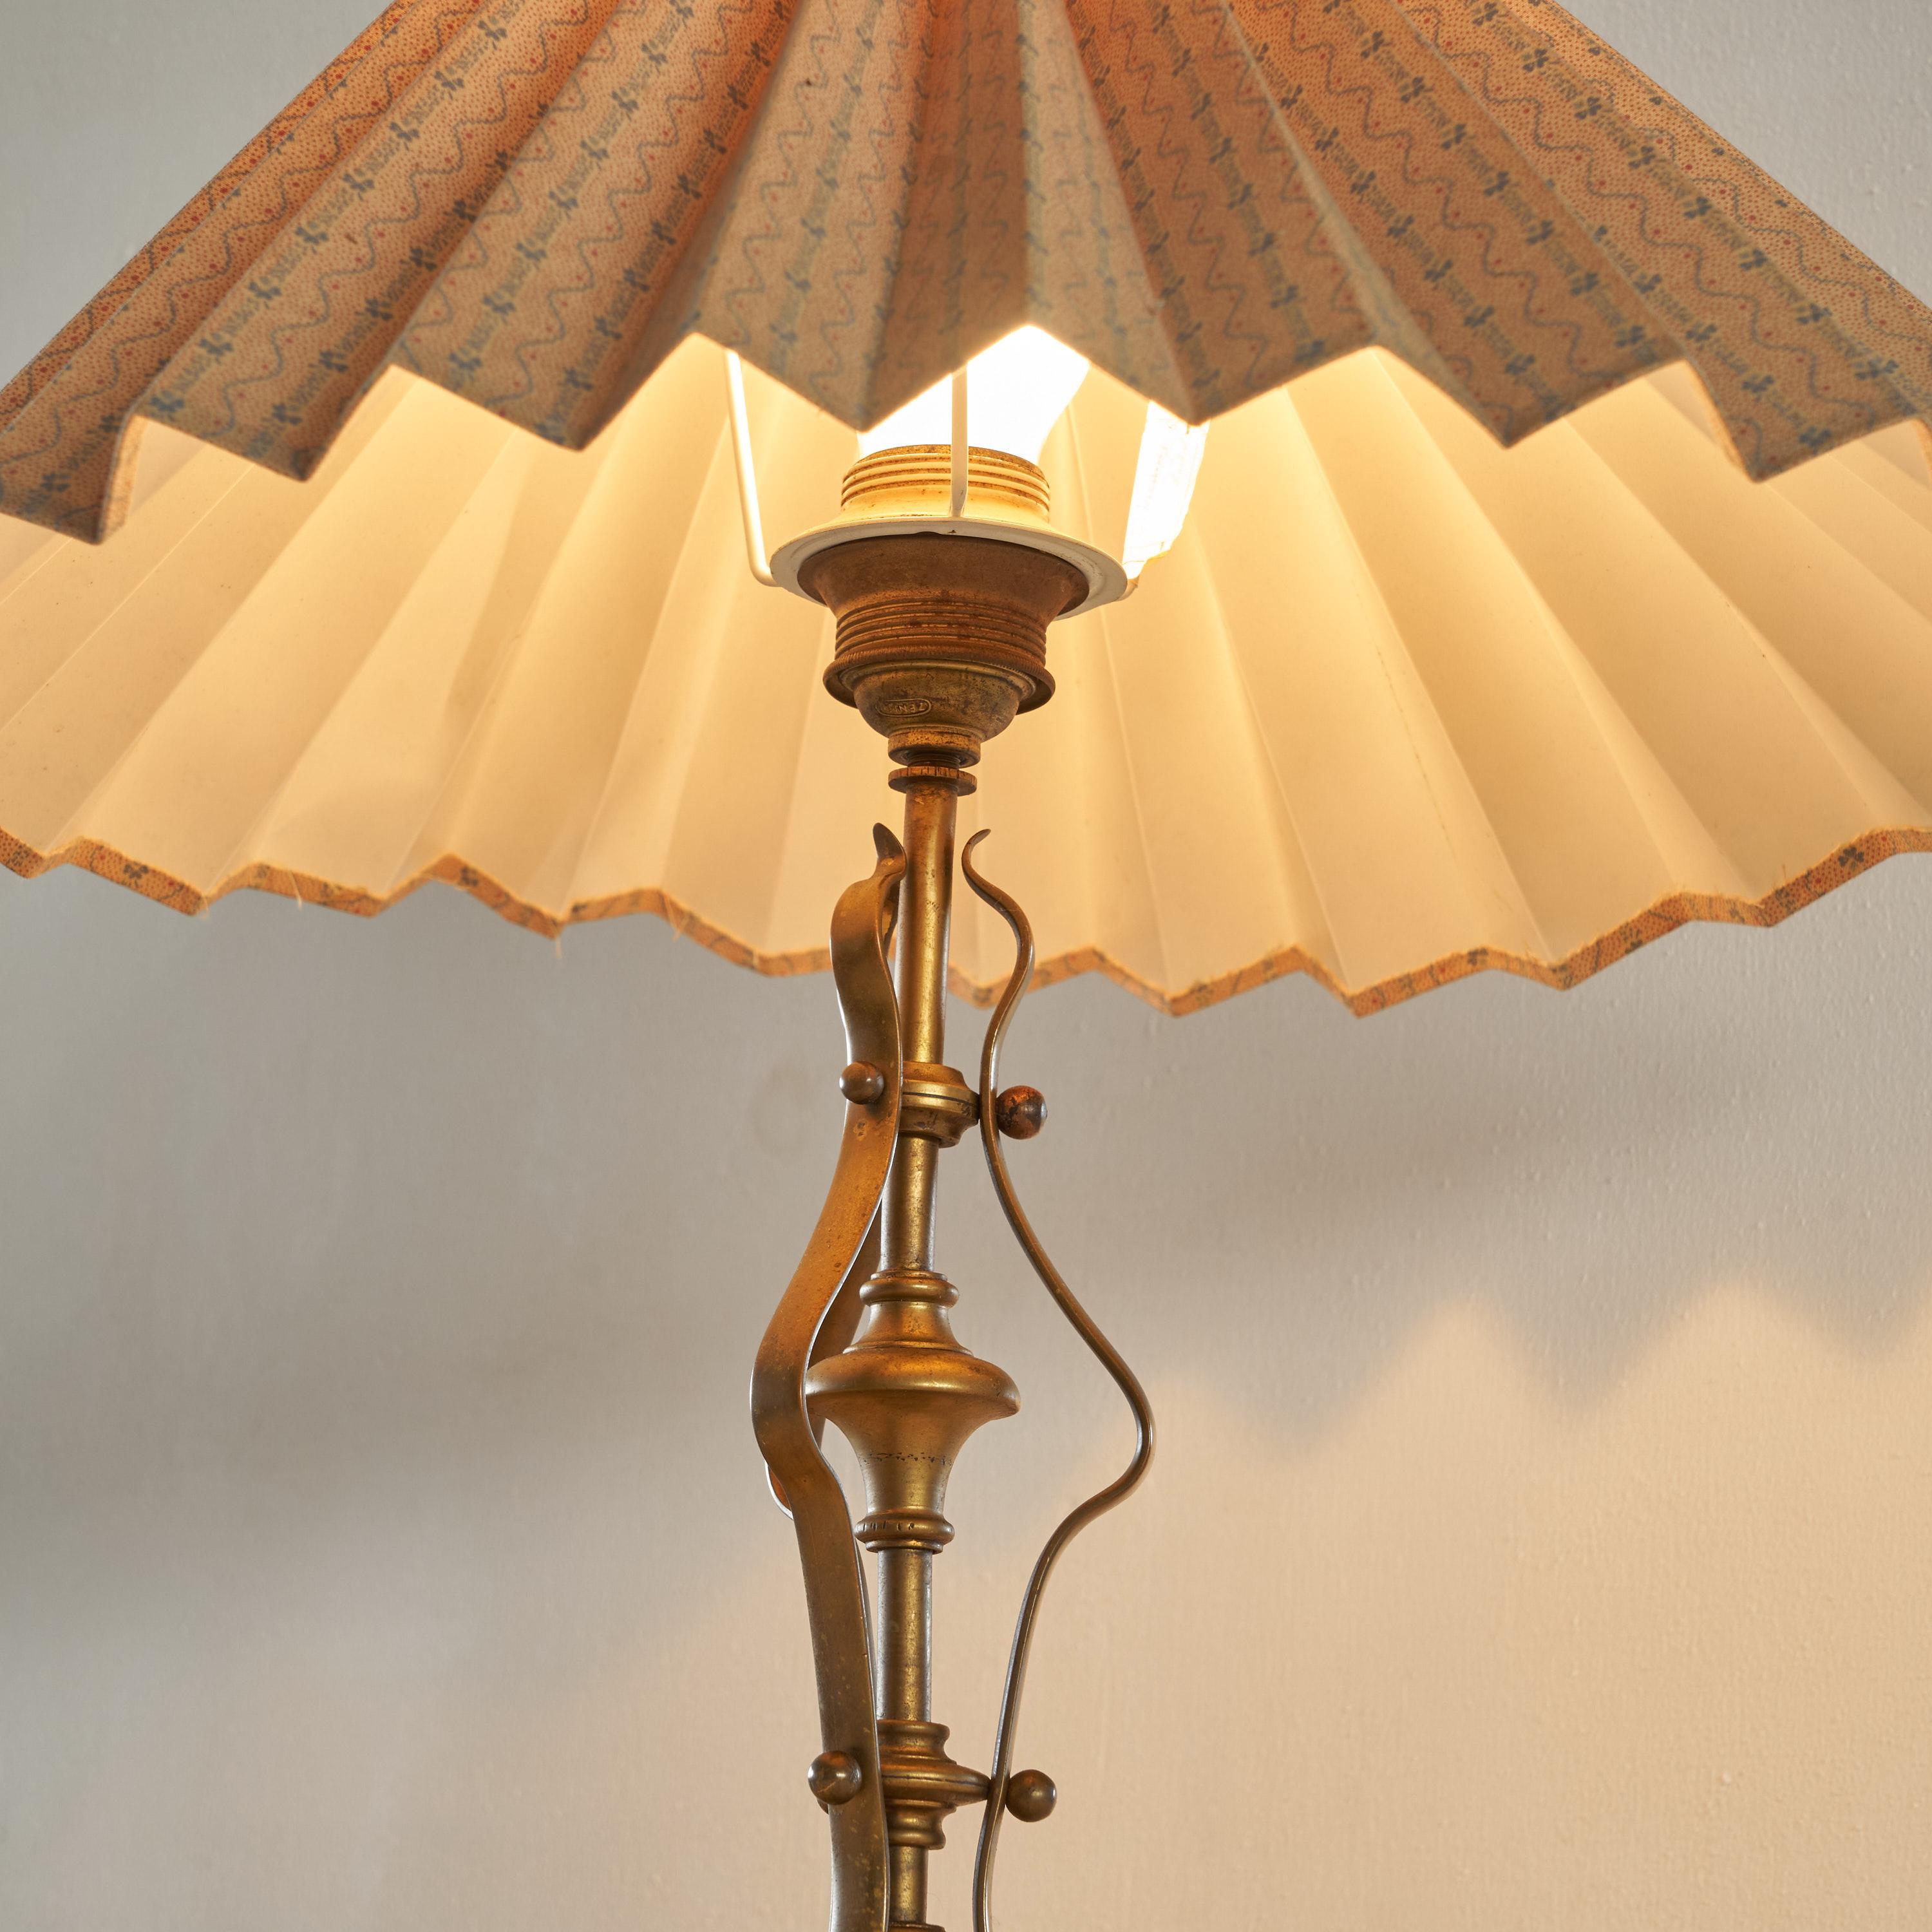 Art Nouveau Table Lamp in Patinated Brass with Plissé Shade For Sale 1